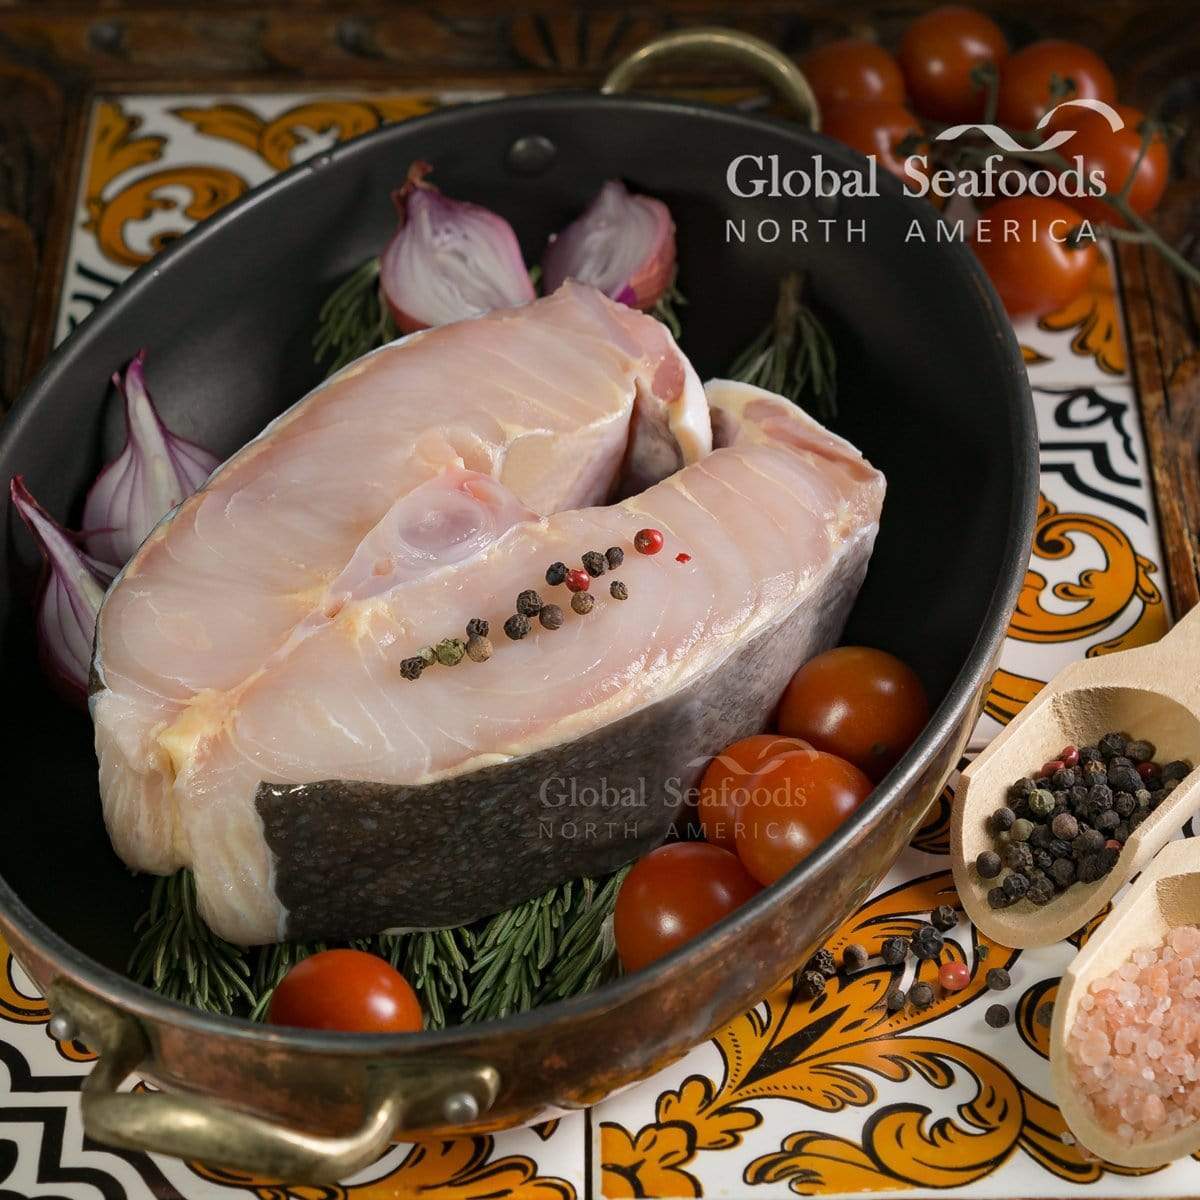 Fresh, premium-quality sturgeon displayed on ice, showcasing the freshness and high quality offered by Global Seafood